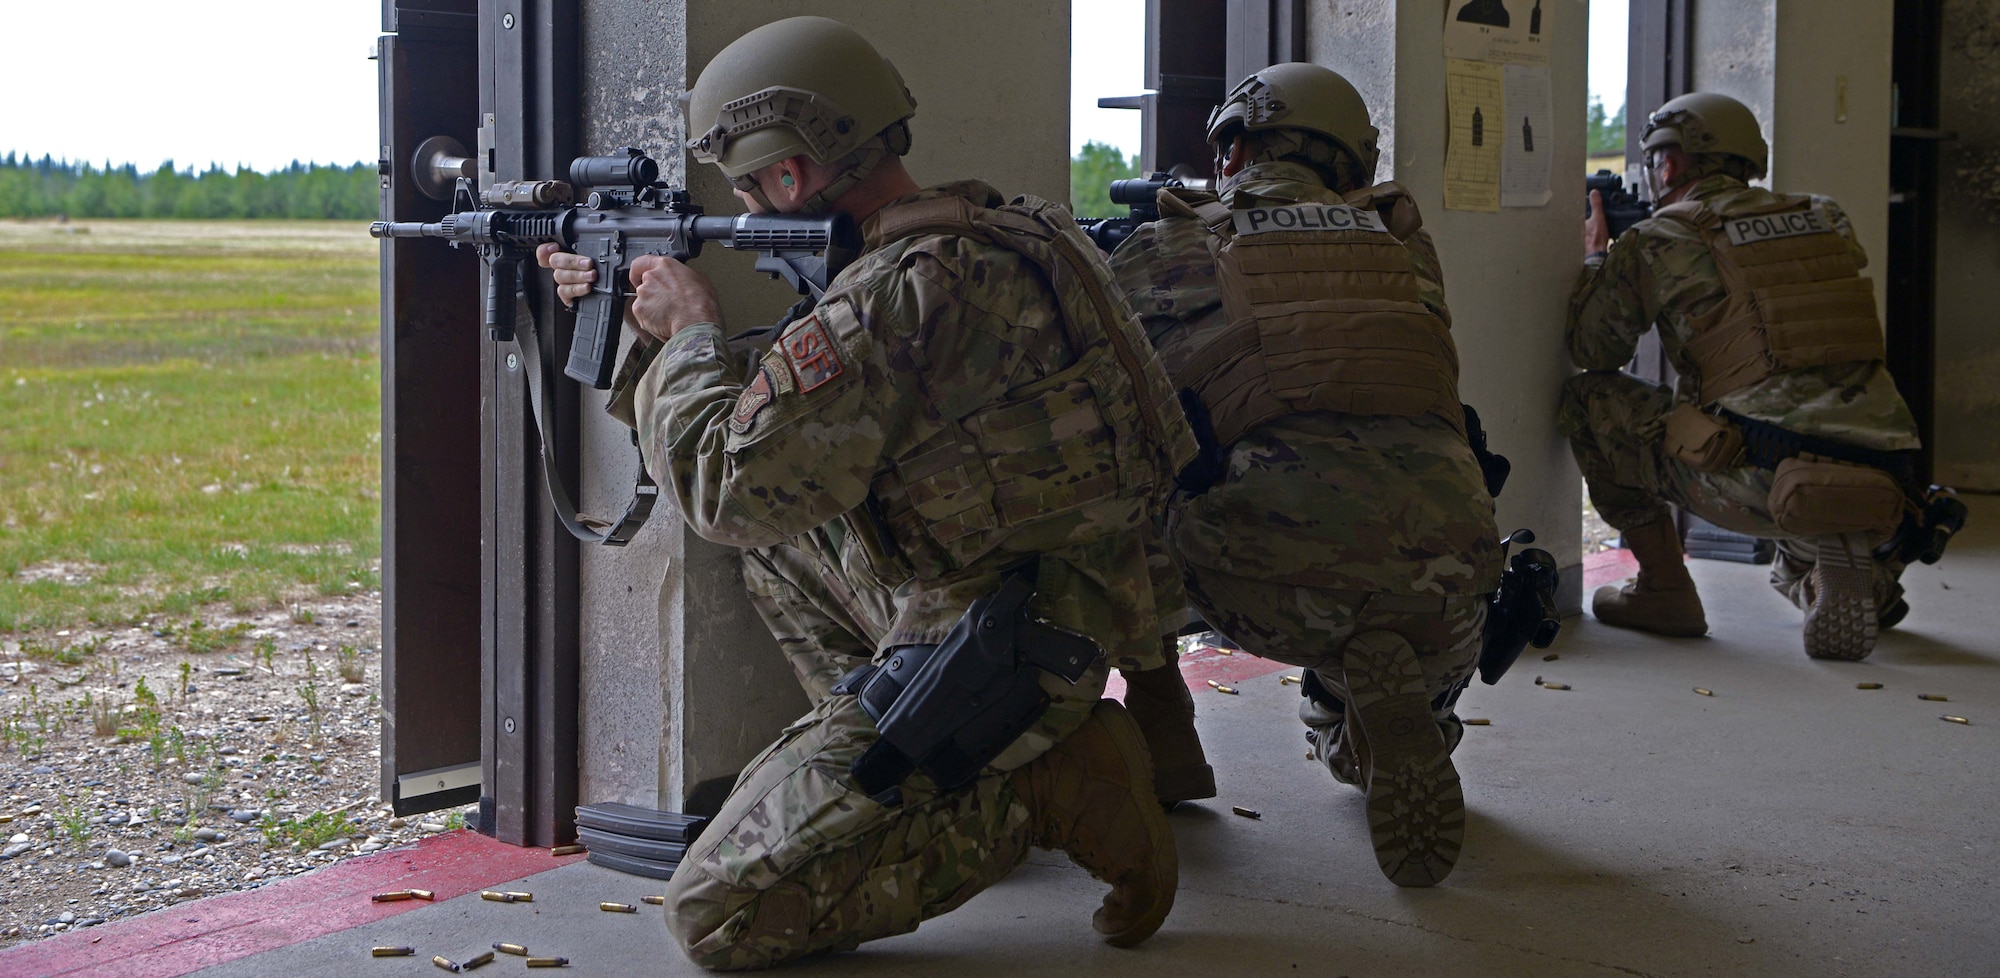 Airmen from the 354th Security Forces Squadron fire M4 carbines from the kneeling supported position during a new Security Forces Qualification Course on Eielson Air Force Base, Alaska, July 14, 2021. The new course will teach Defenders new firing positions and how to engage targets more tactically. (U.S. Air Force photo by Senior Airman Beaux Hebert)